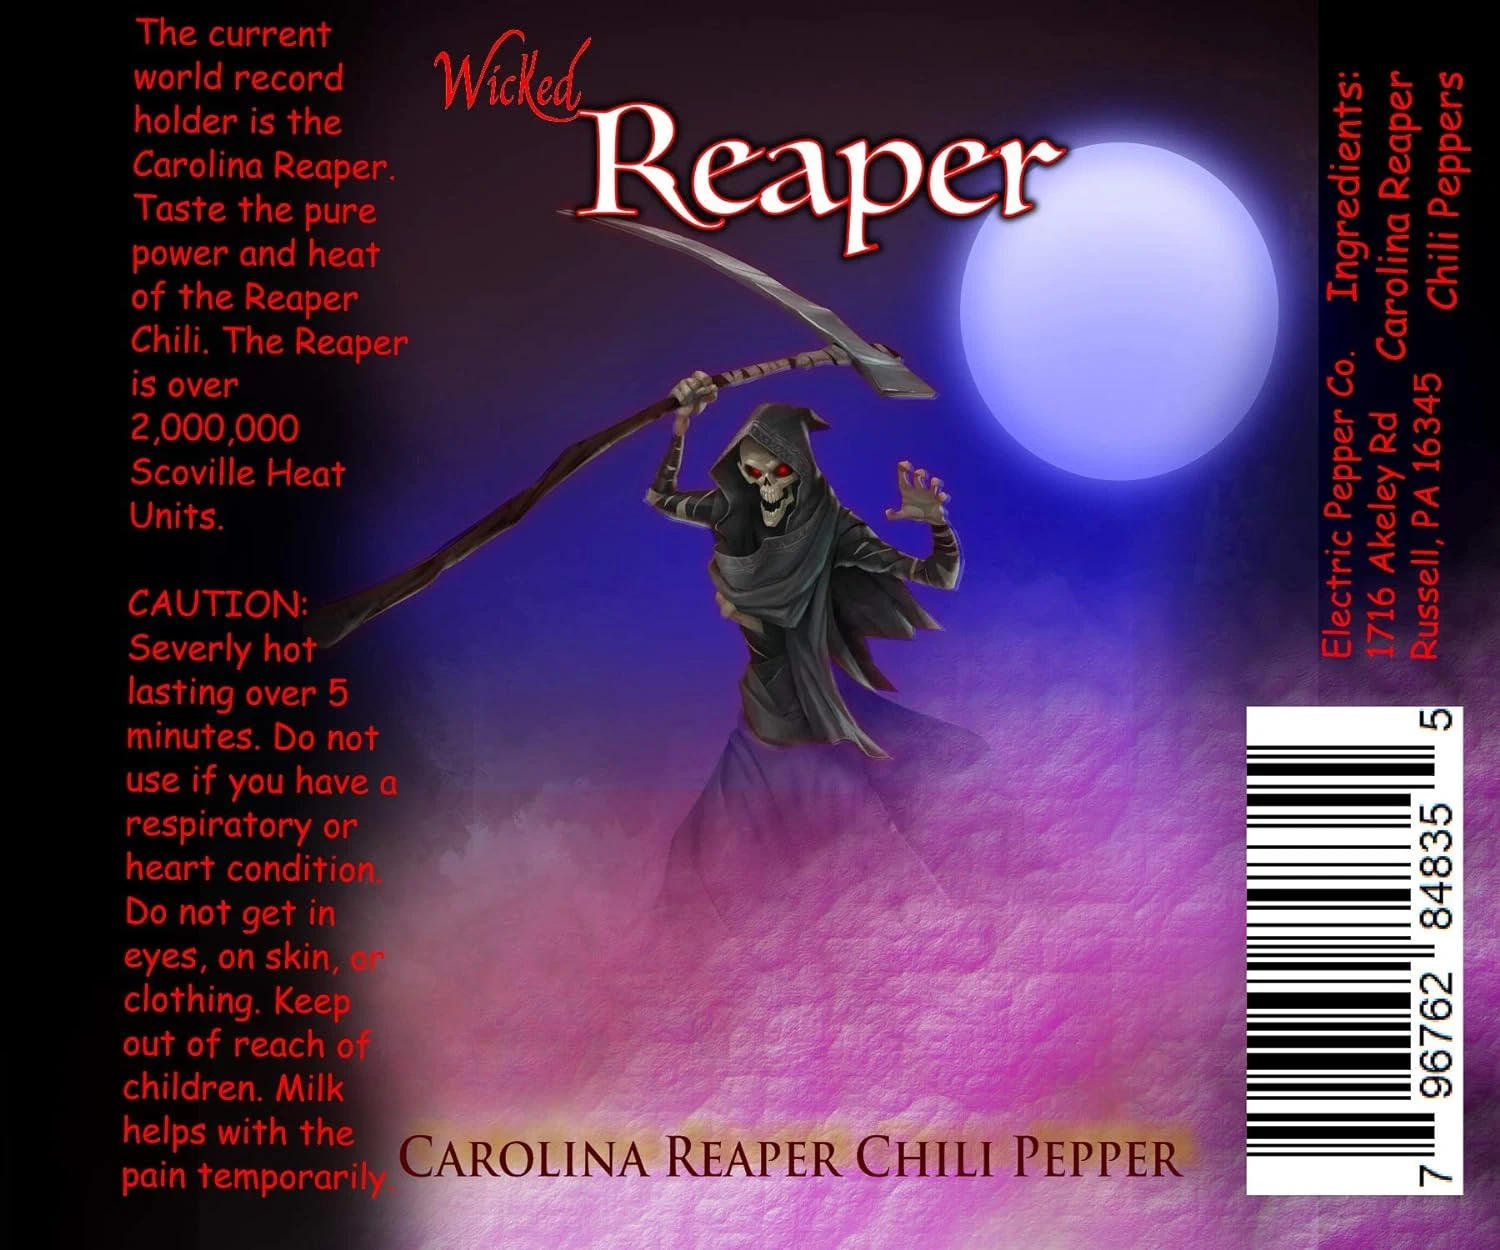 Product Label For Wicked Reaper Reaper Peppers - 
7 Count